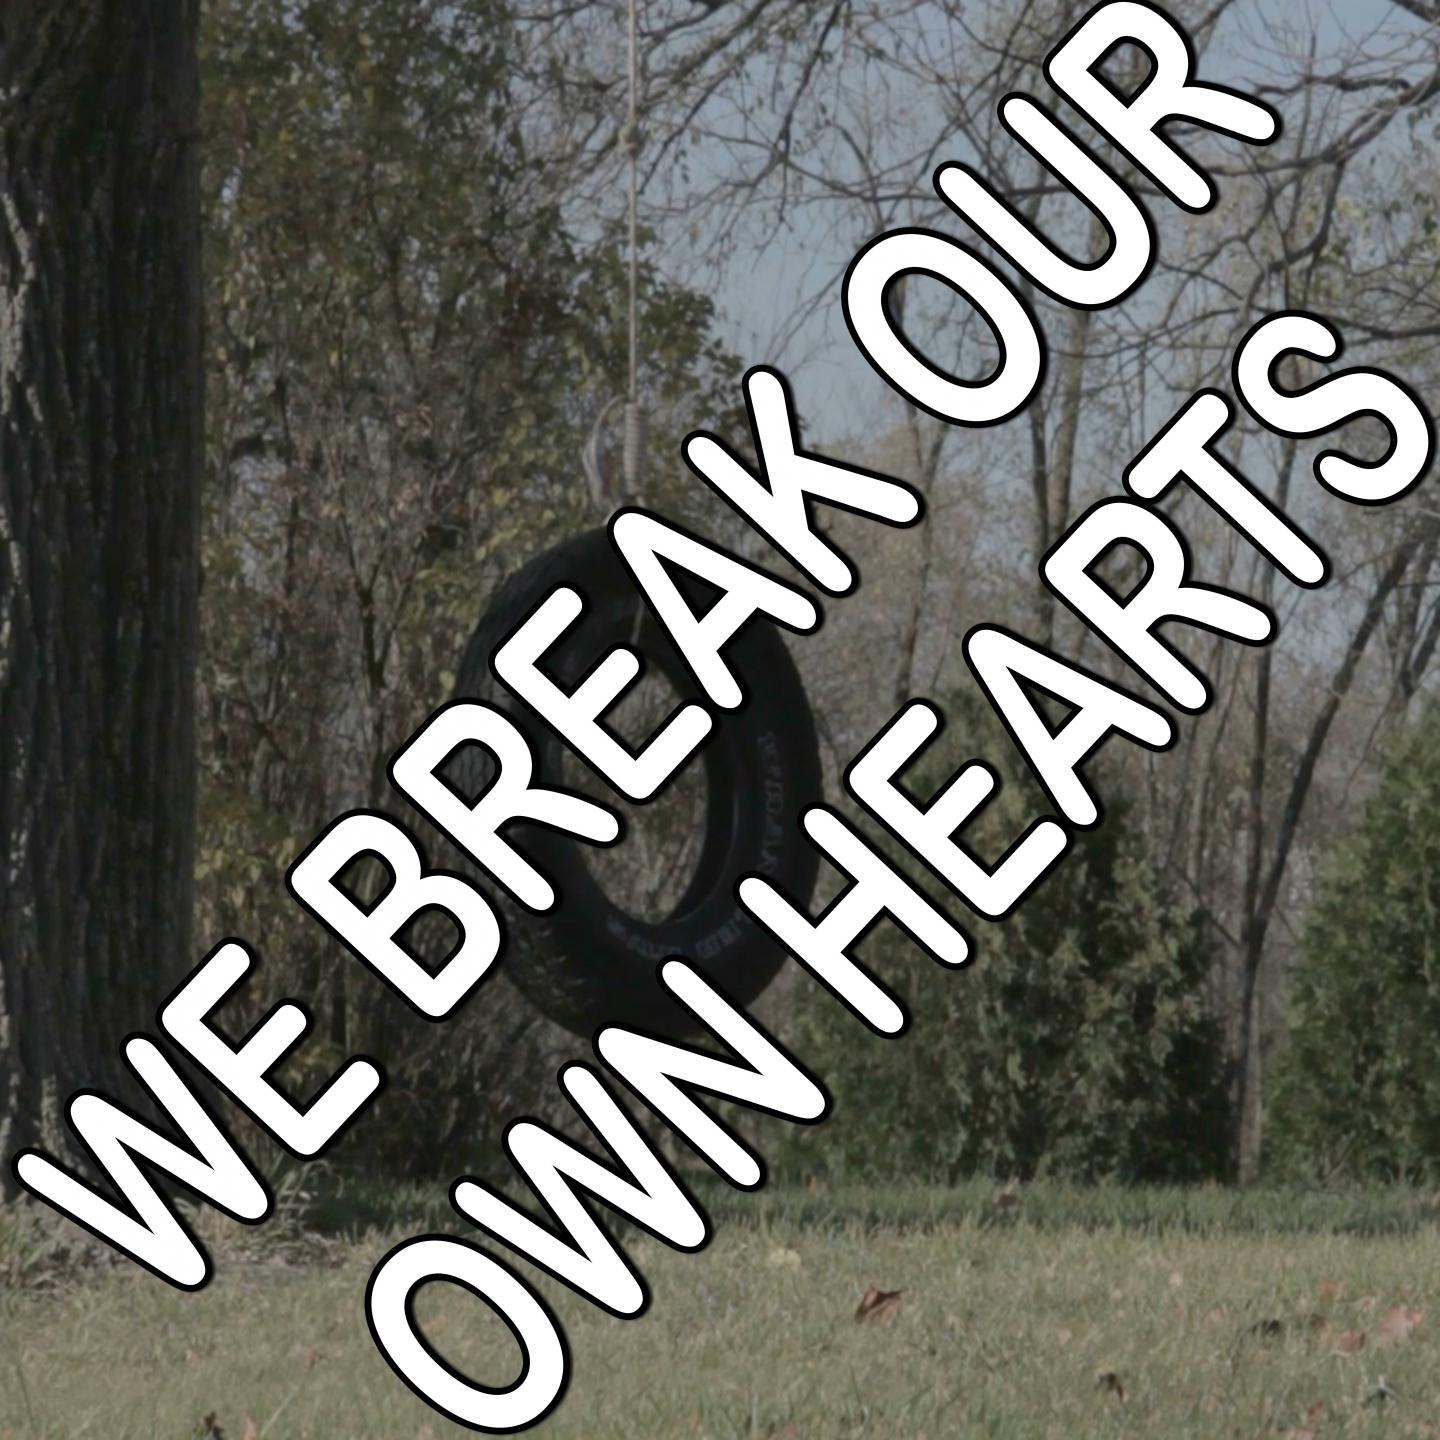 We Break Our Own Hearts - Tribute to Michael Ball